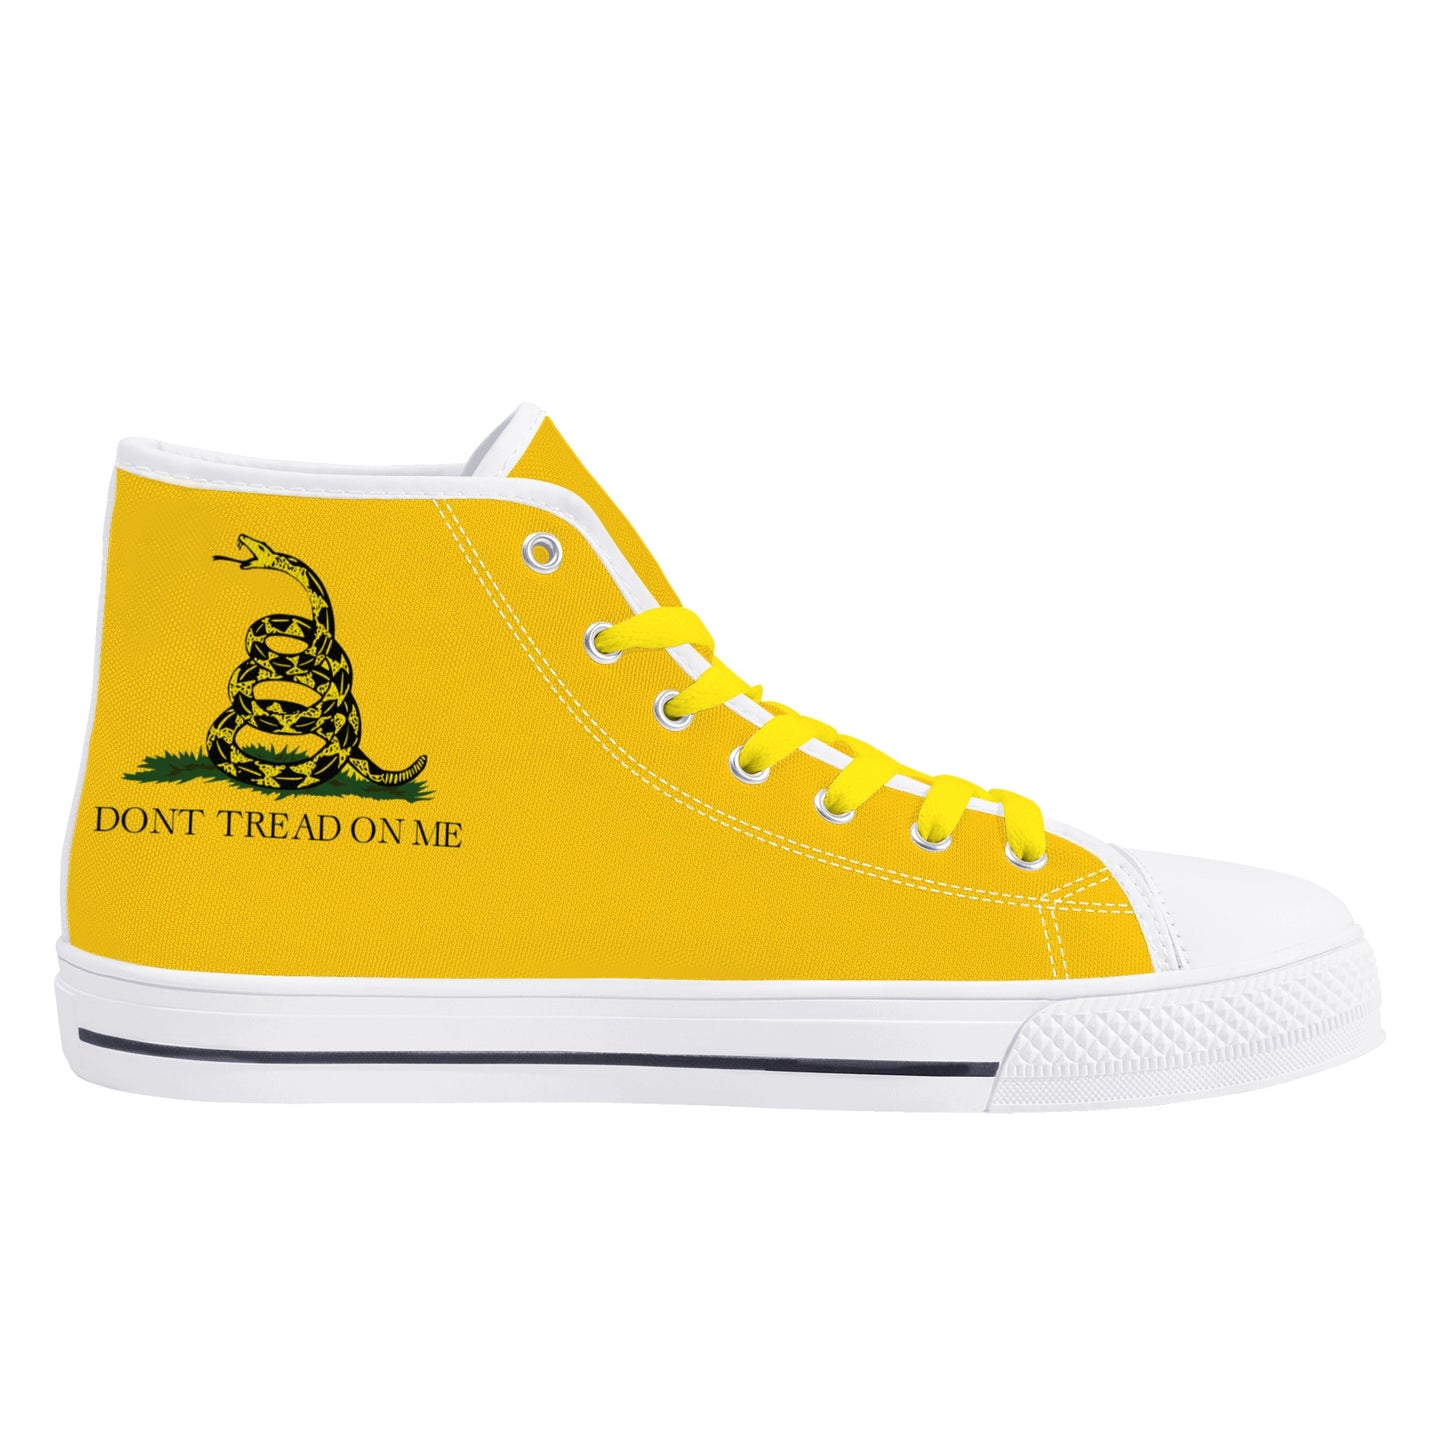 Don't Tread on Me, Mens Canvas High Top